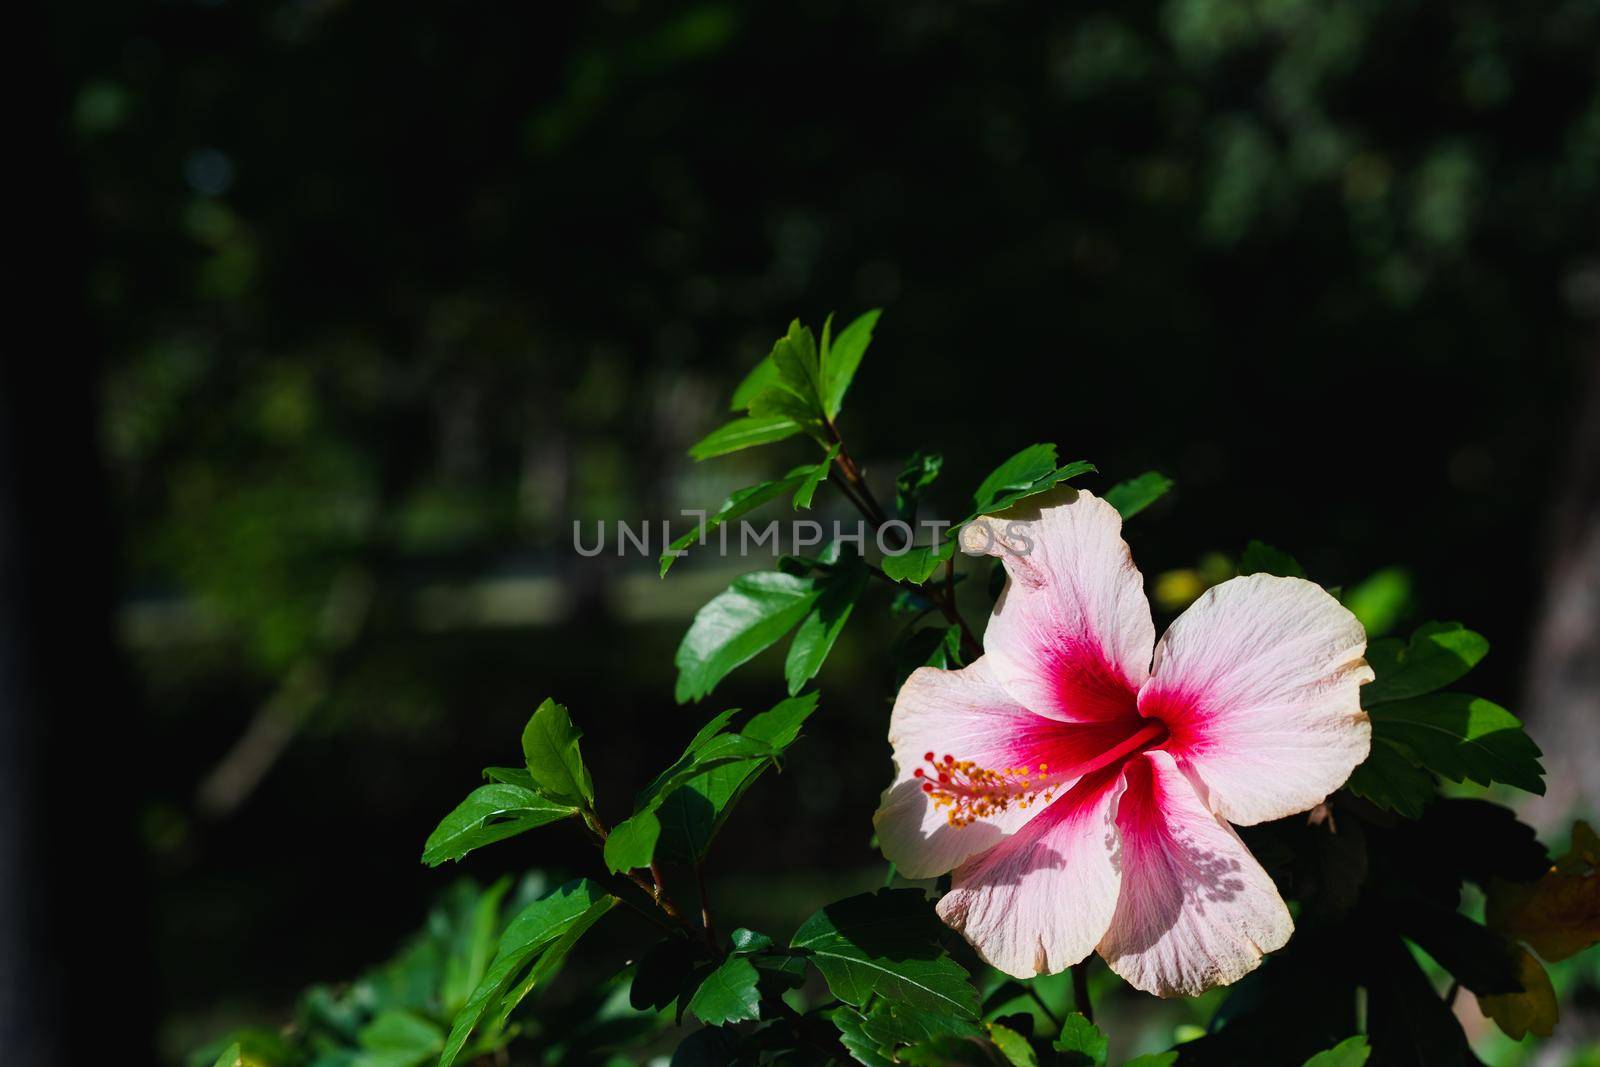 Close up of Chaba (hibiscus) flower in blooming with leaf in the garden